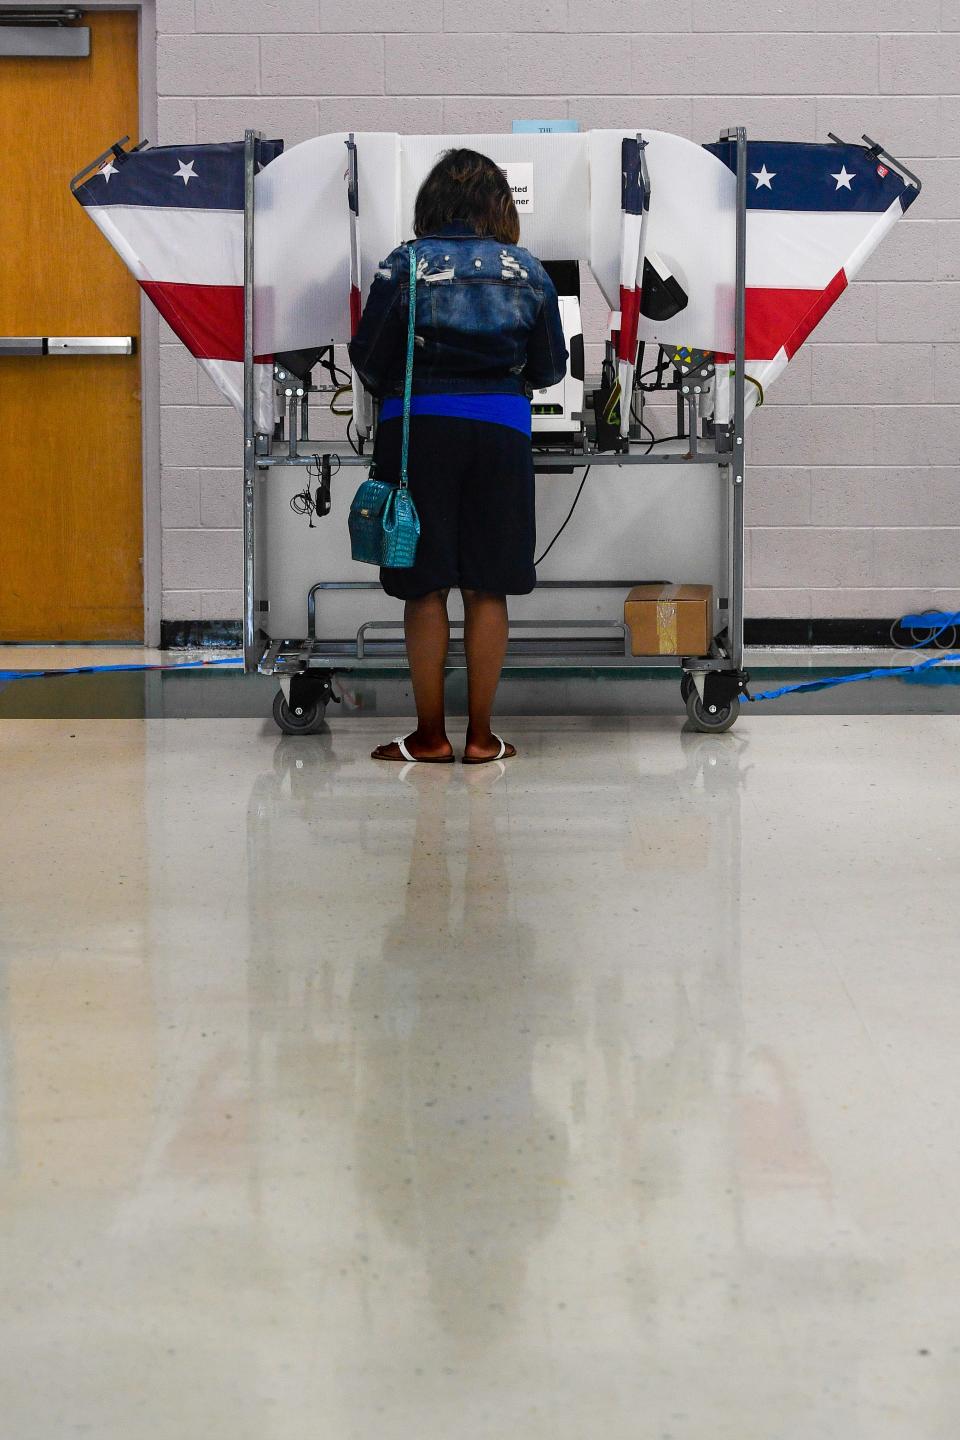 A woman votes in the primary election at Thomas A. Edison Elementary in Nashville on Aug. 4.